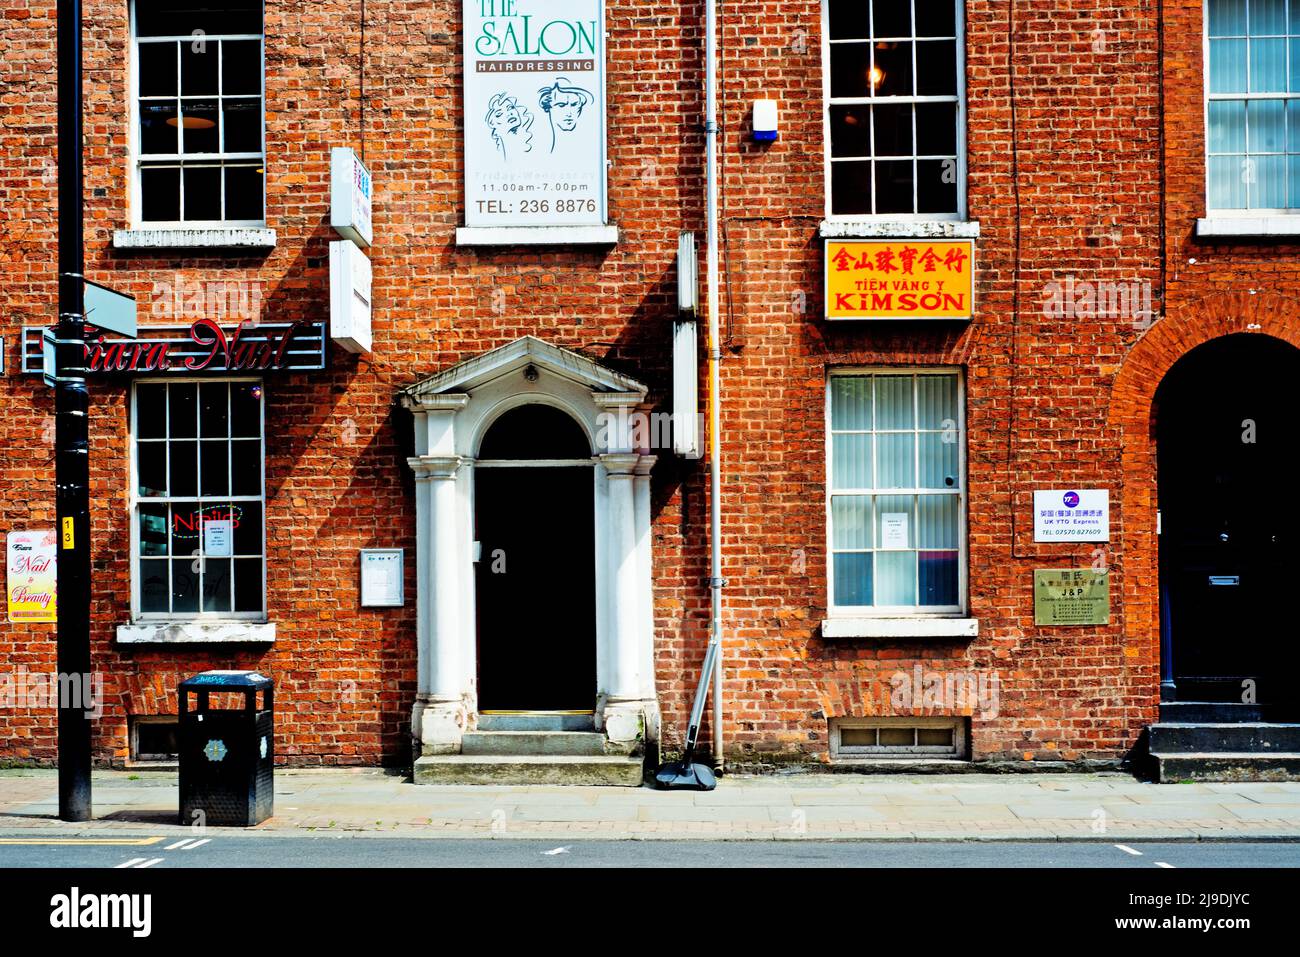 Beauty and hairdressing salons, Princess Street, Manchester, England Stock Photo